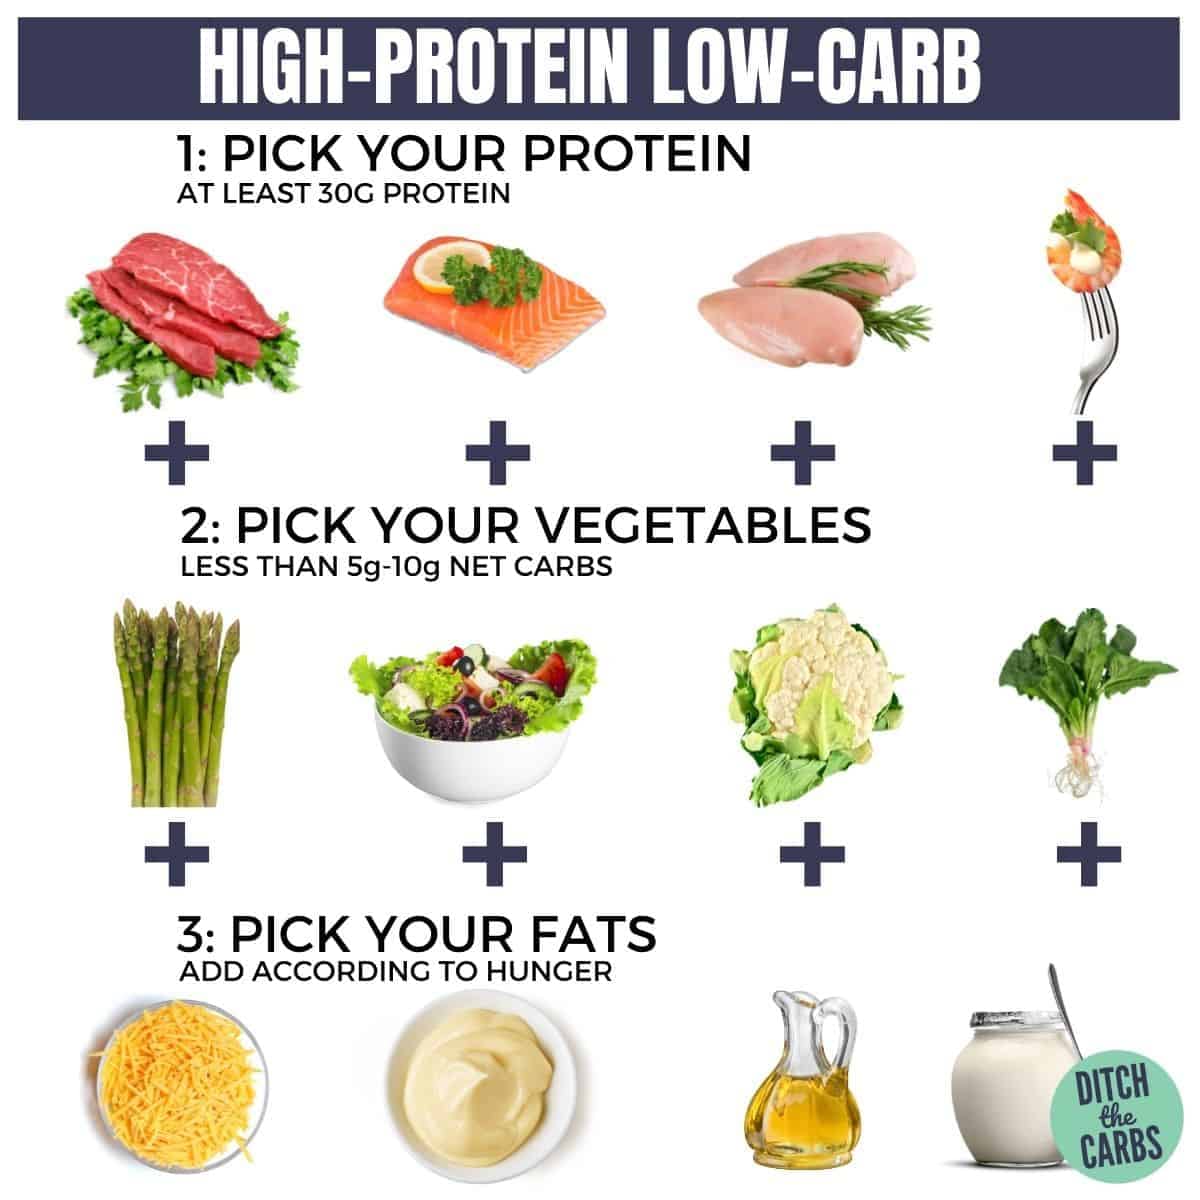 High-Protein Low-Carb Diet (How Much Protein Do You Need?)